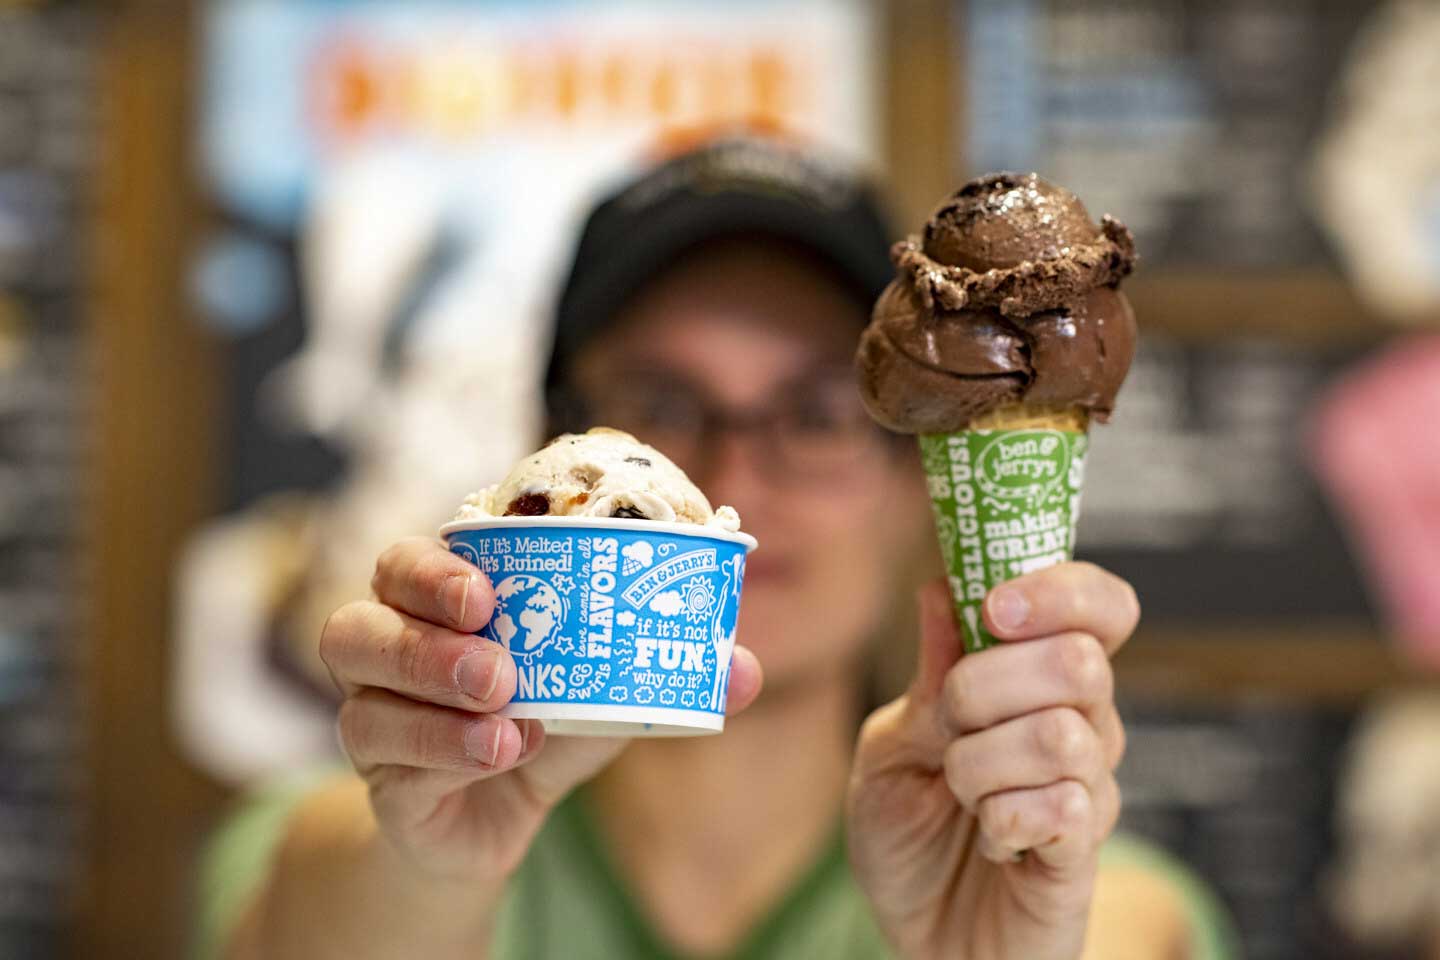 Ben & Jerry’s continues its annual tradition as a thanks to ice cream fans across the globe with Free Cone Day An estimated 1 million cones to be given away at the tradition which is over 40 years old.